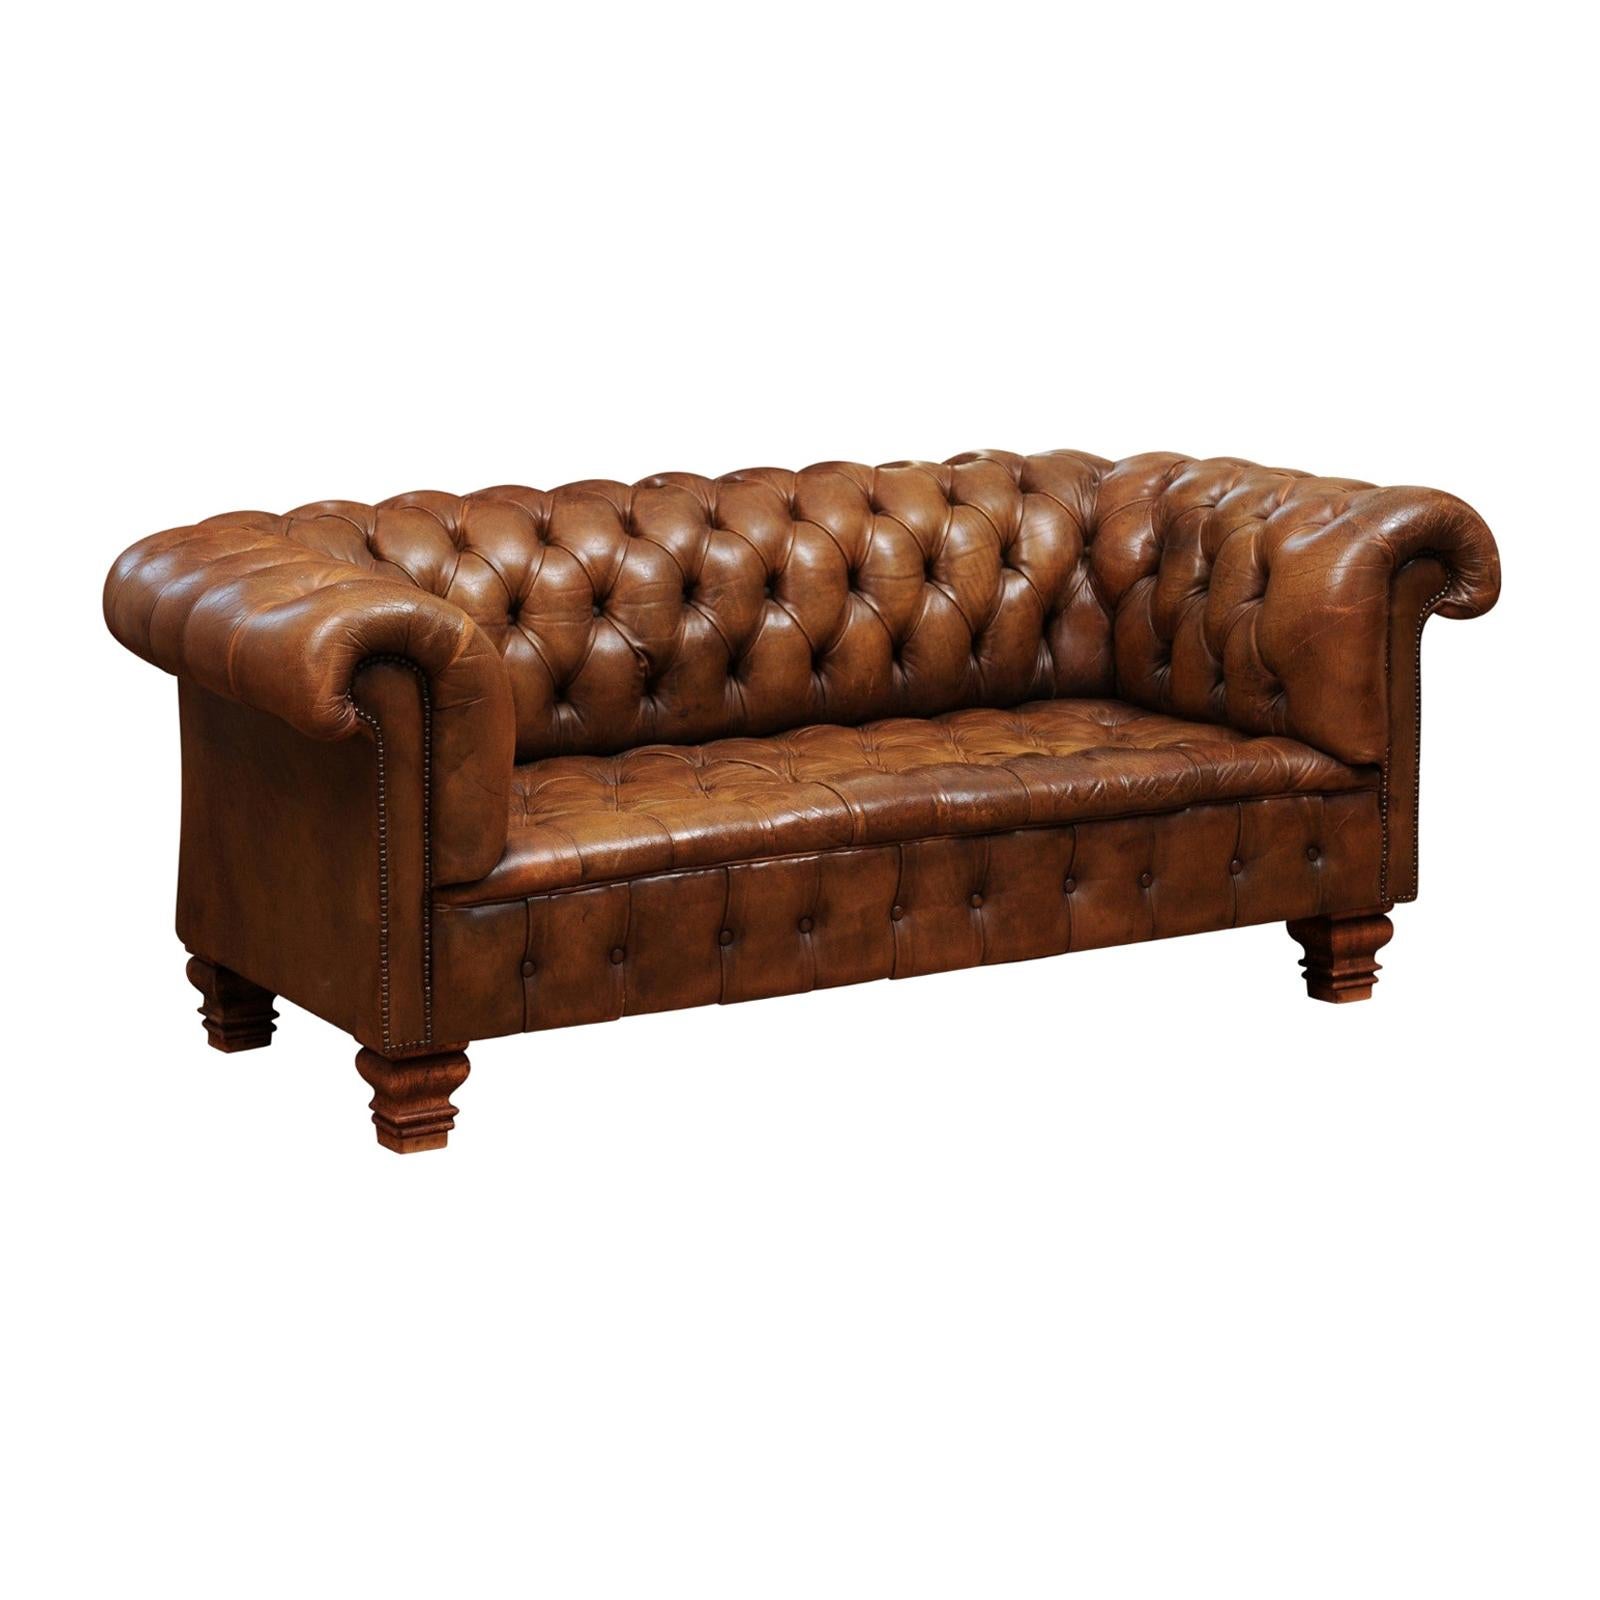 French Old Leather Tufted Chesterfield Sofa with Nailhead Trim, circa 1890